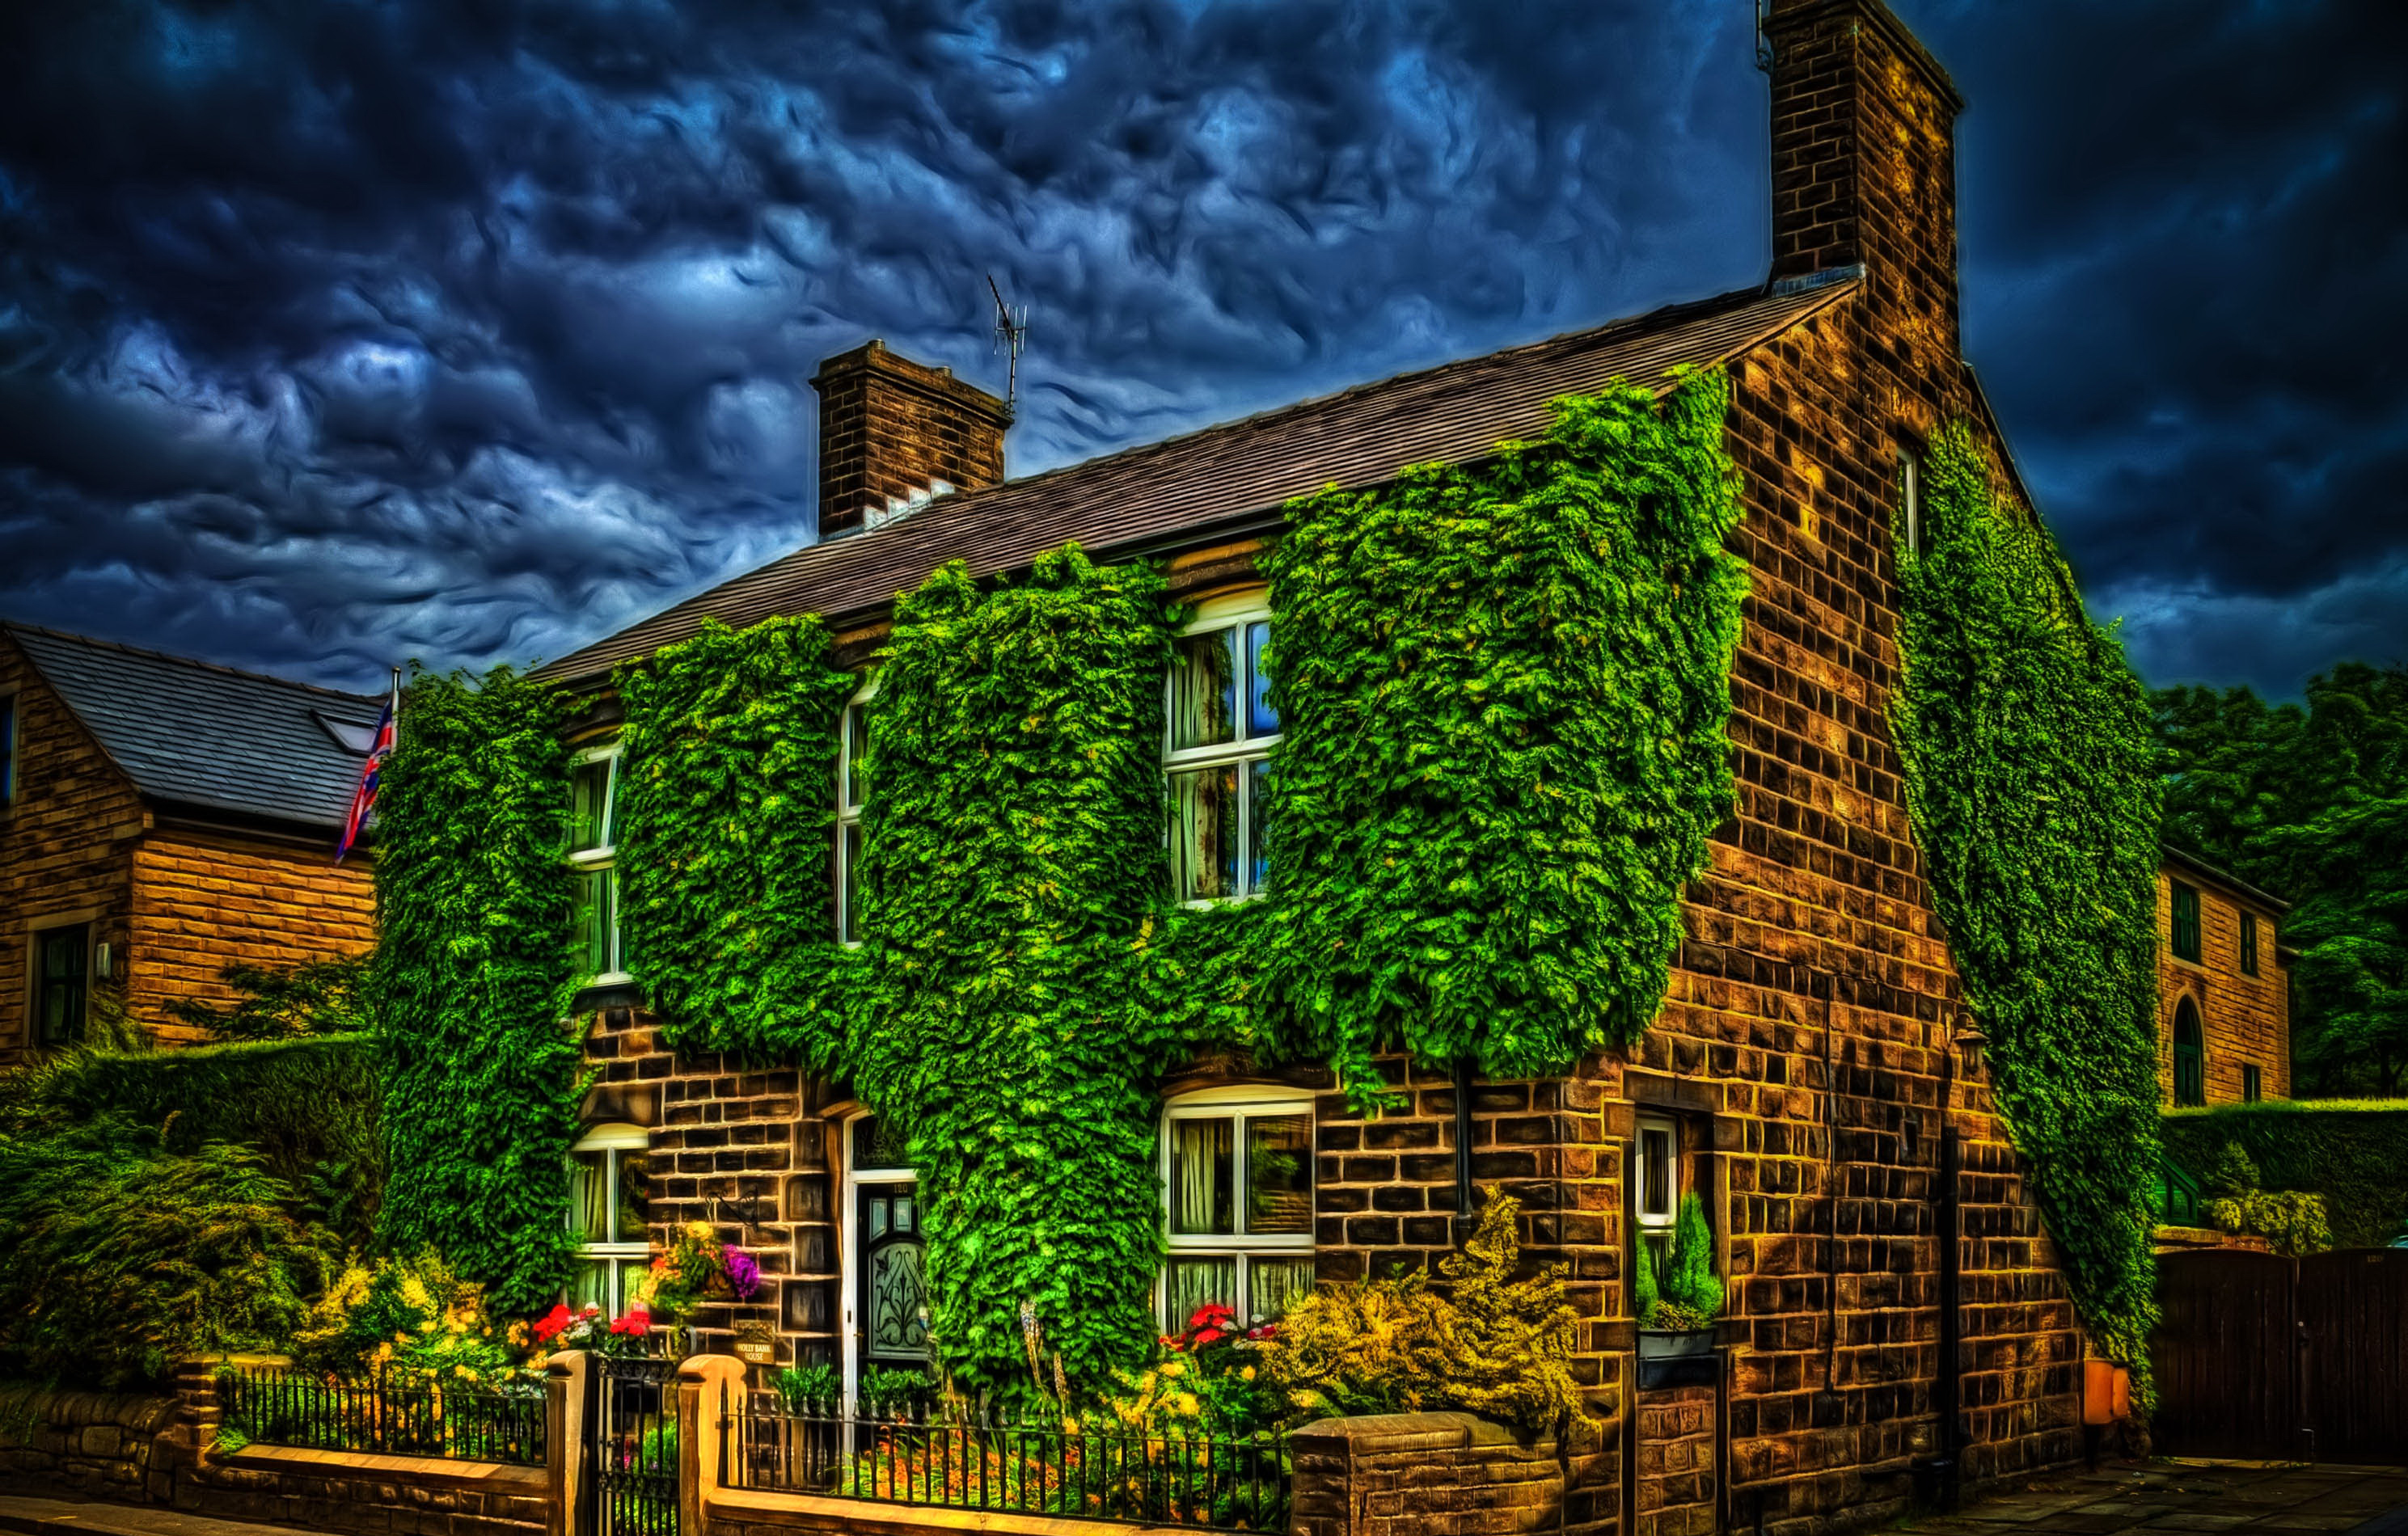 green, england, brick, photography, hdr, architecture, house, leaf, vine 1080p